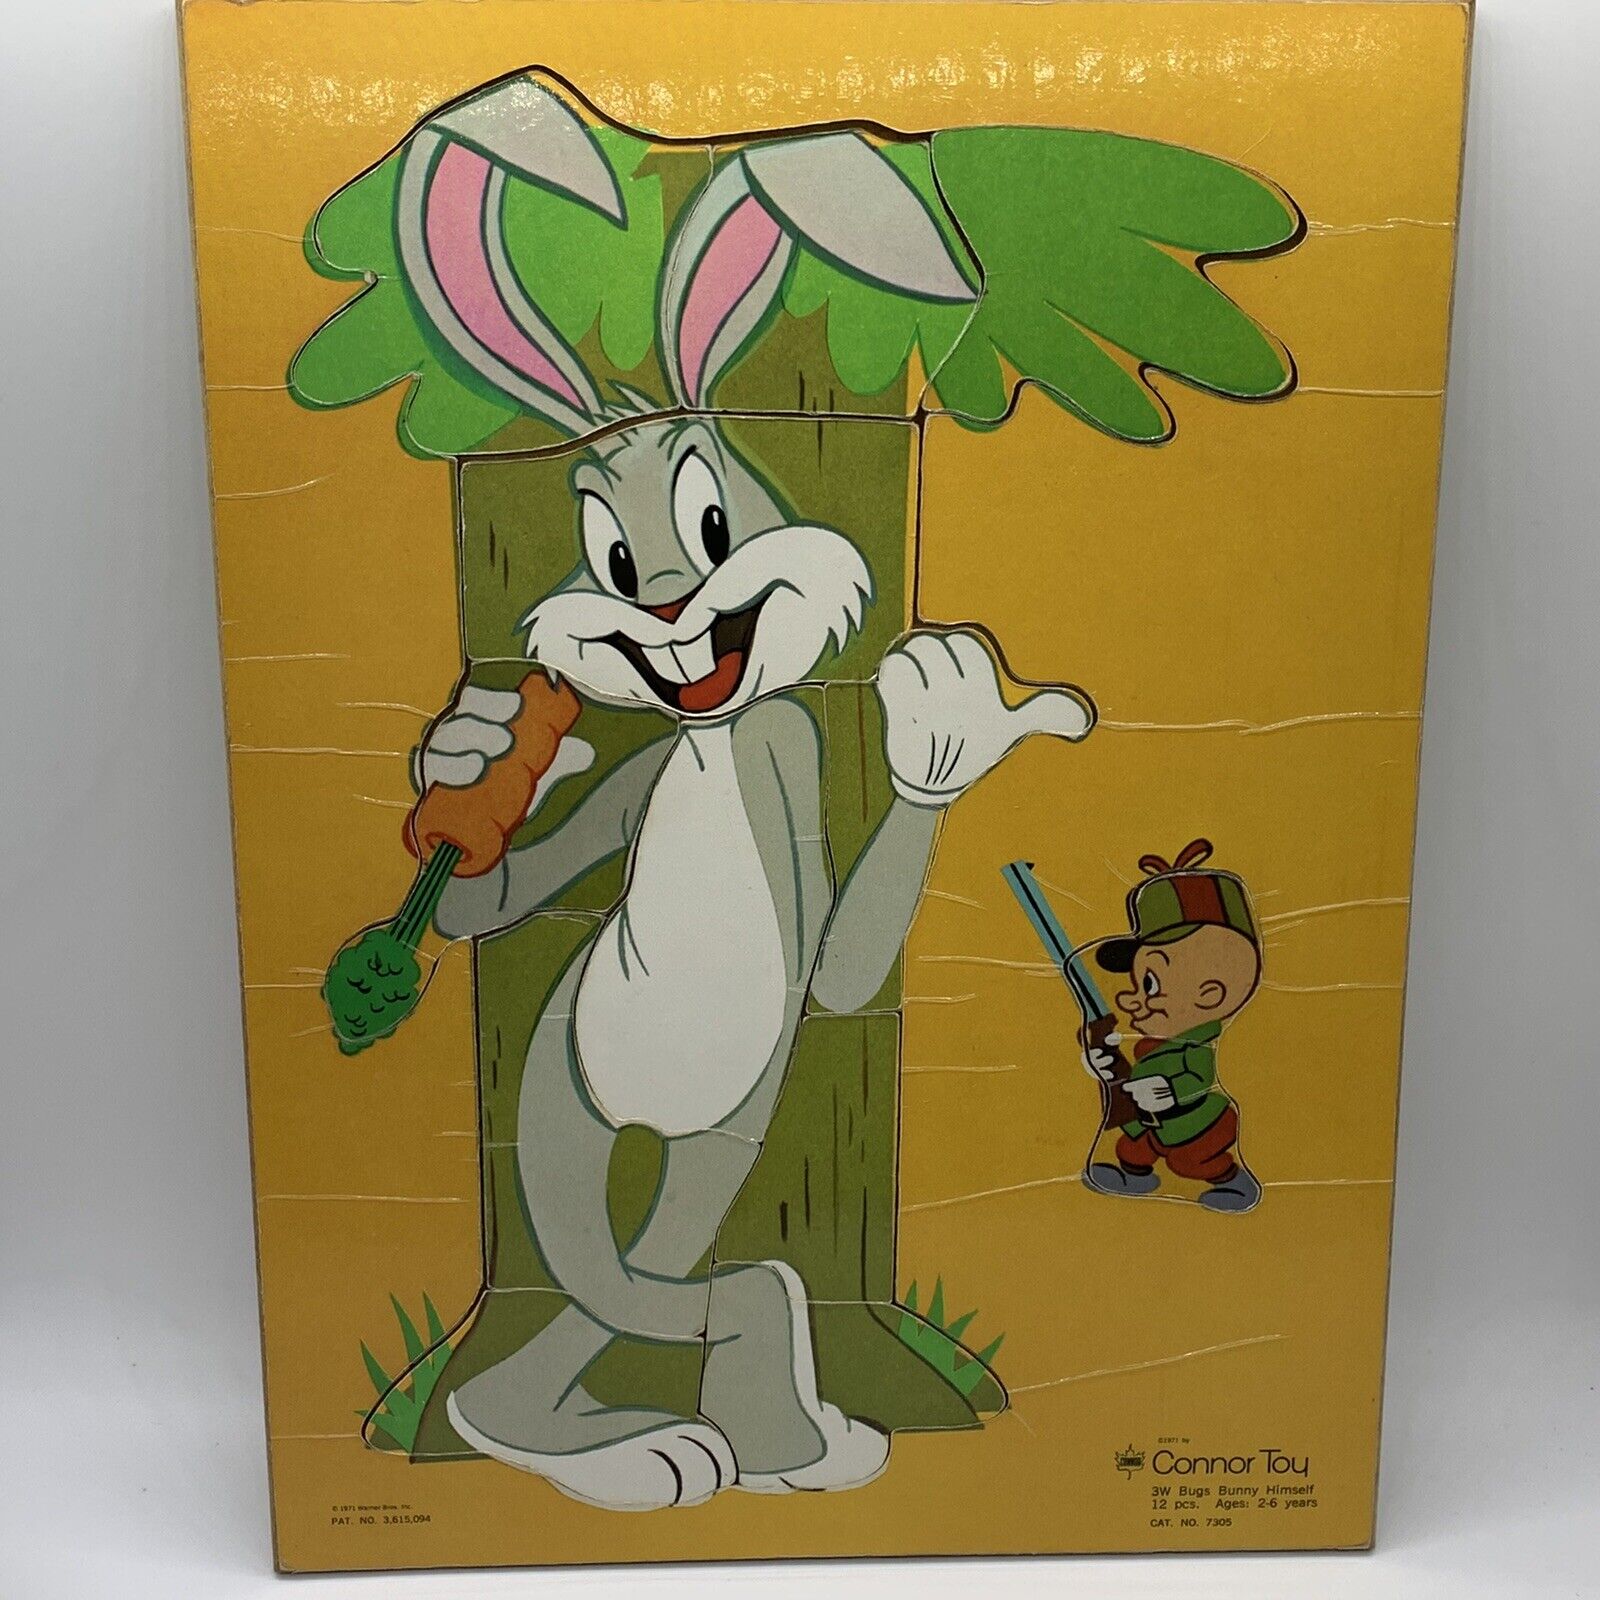 Vintage Wooden Tray Puzzle - Connor Toy - Bugs Bunny Himself - Dated 1971